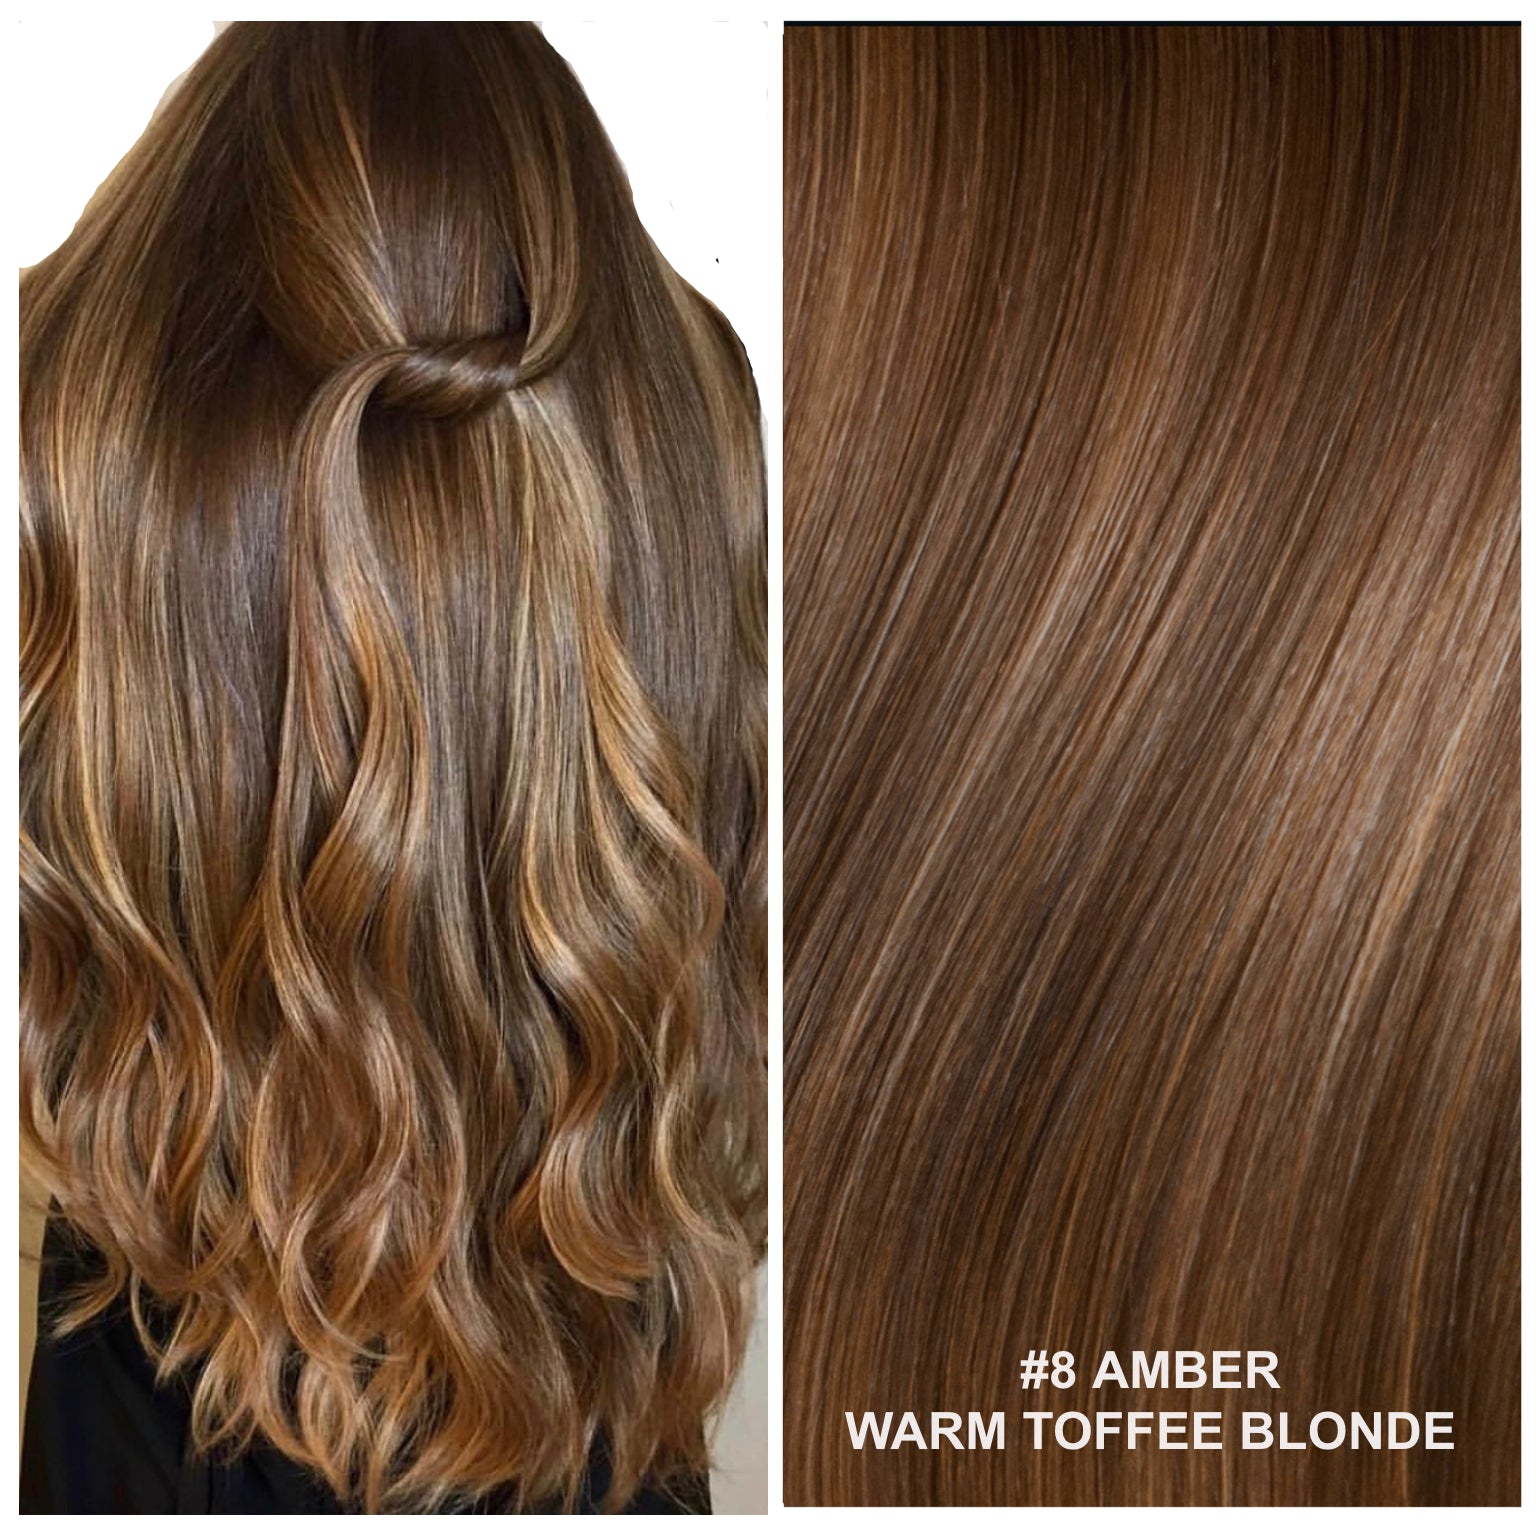 RUSSIAN CLIP IN HAIR EXTENSIONS #8 - AMBER - WARM TOFFEE BLONDE